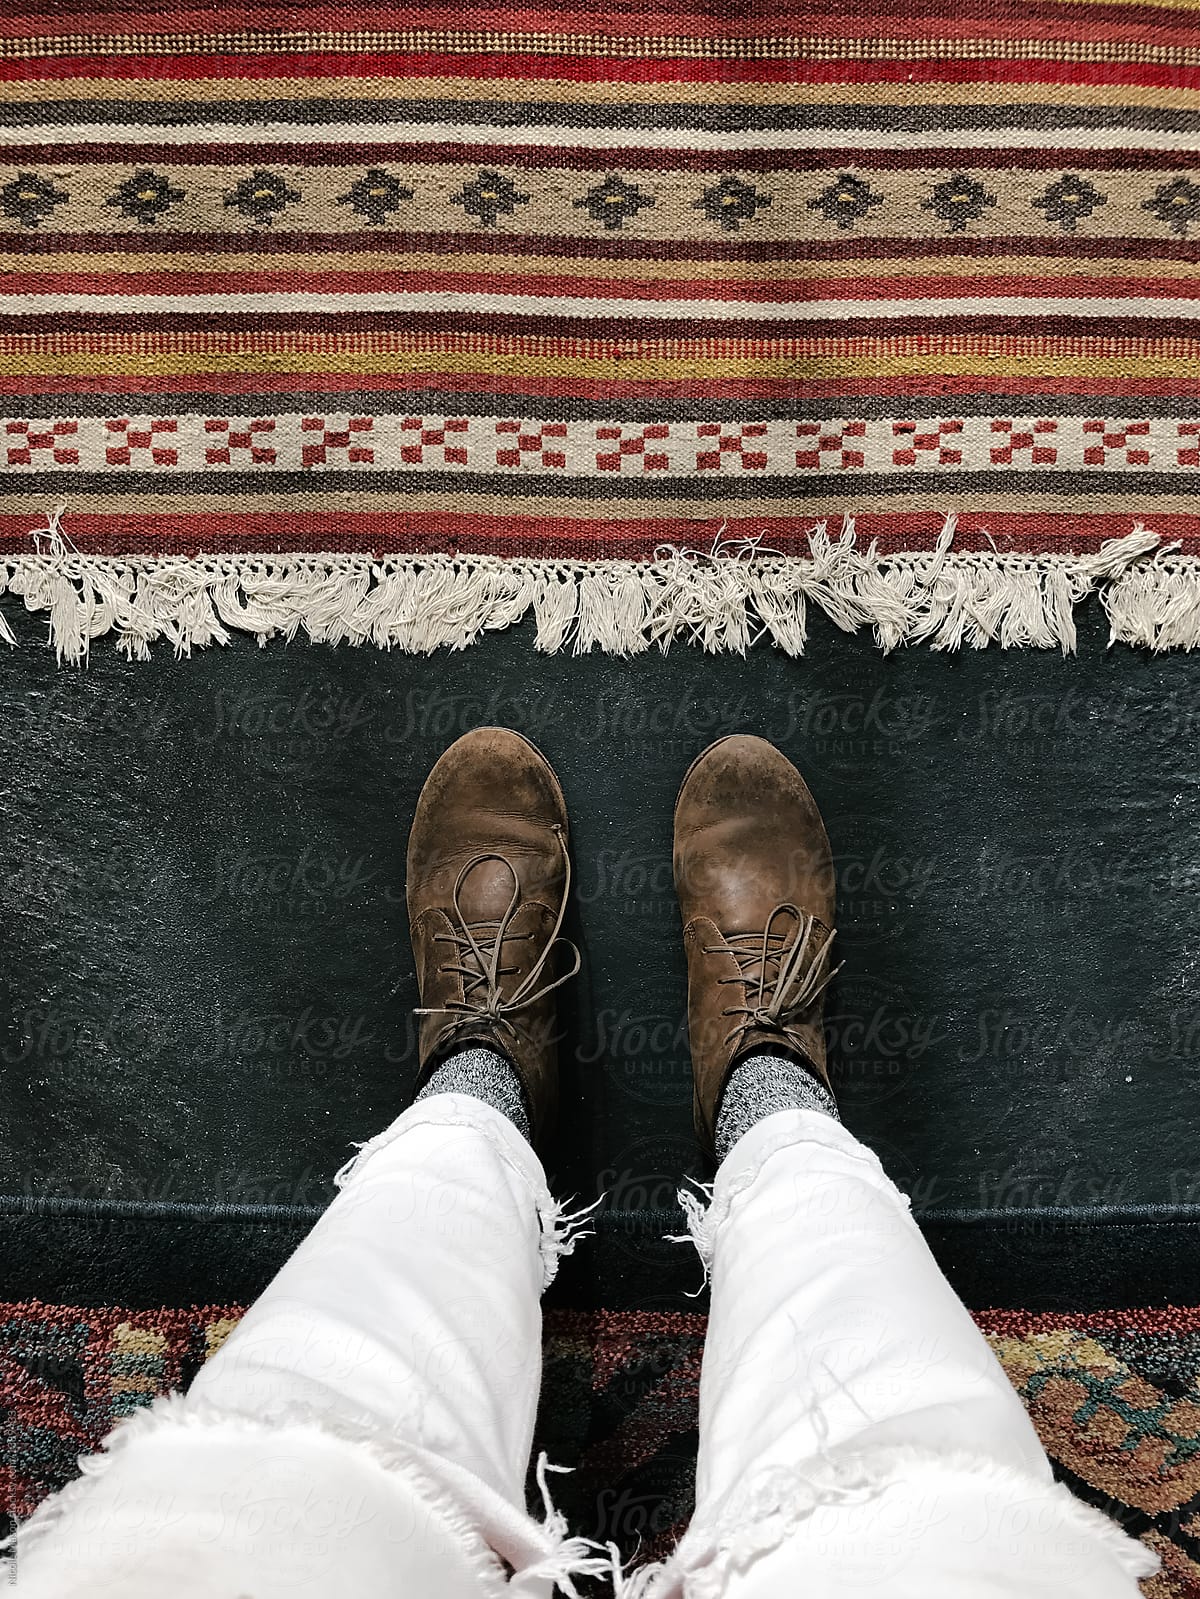 patterned rug on textured floor with person standing in leather shoes